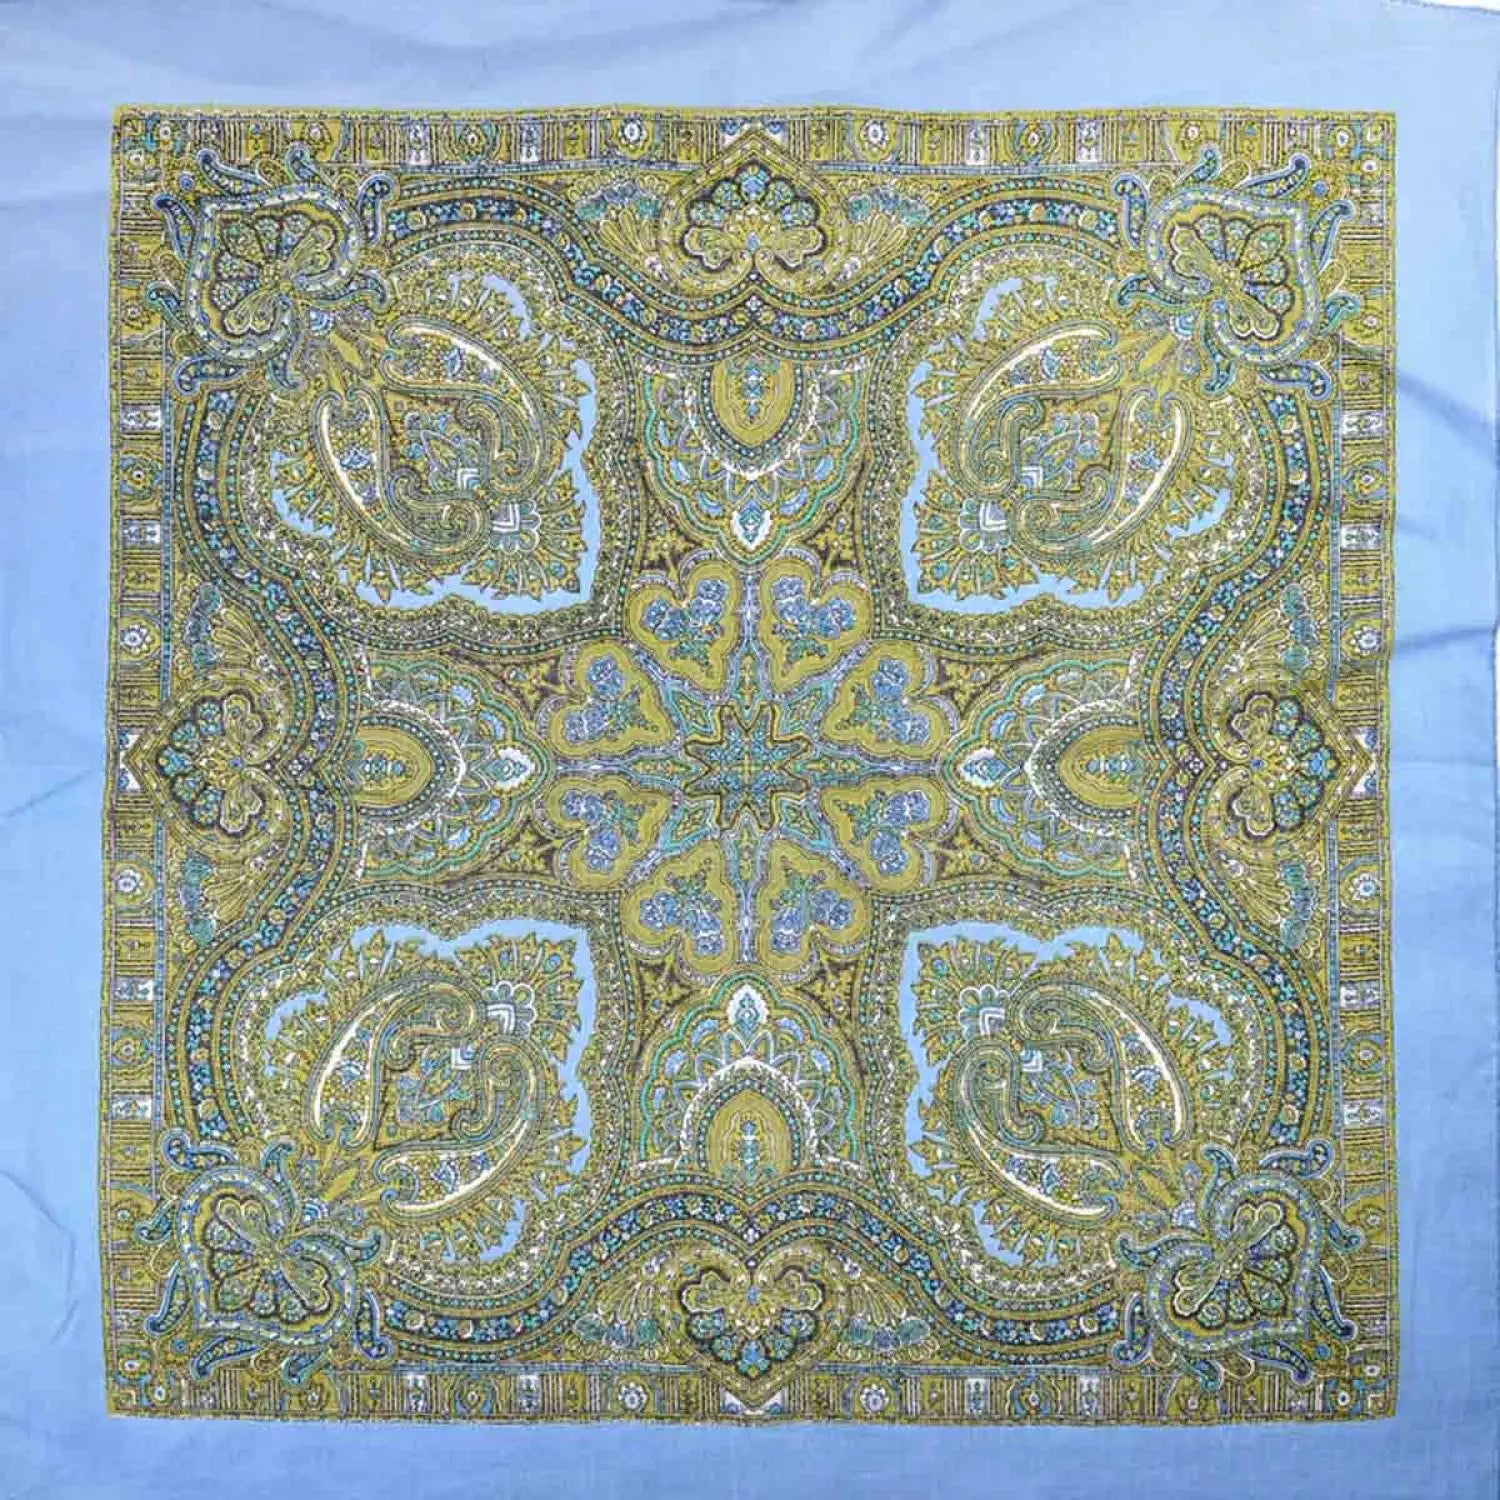 Classic Paisley Bandana - 100% Cotton Square in blue and green paisley print